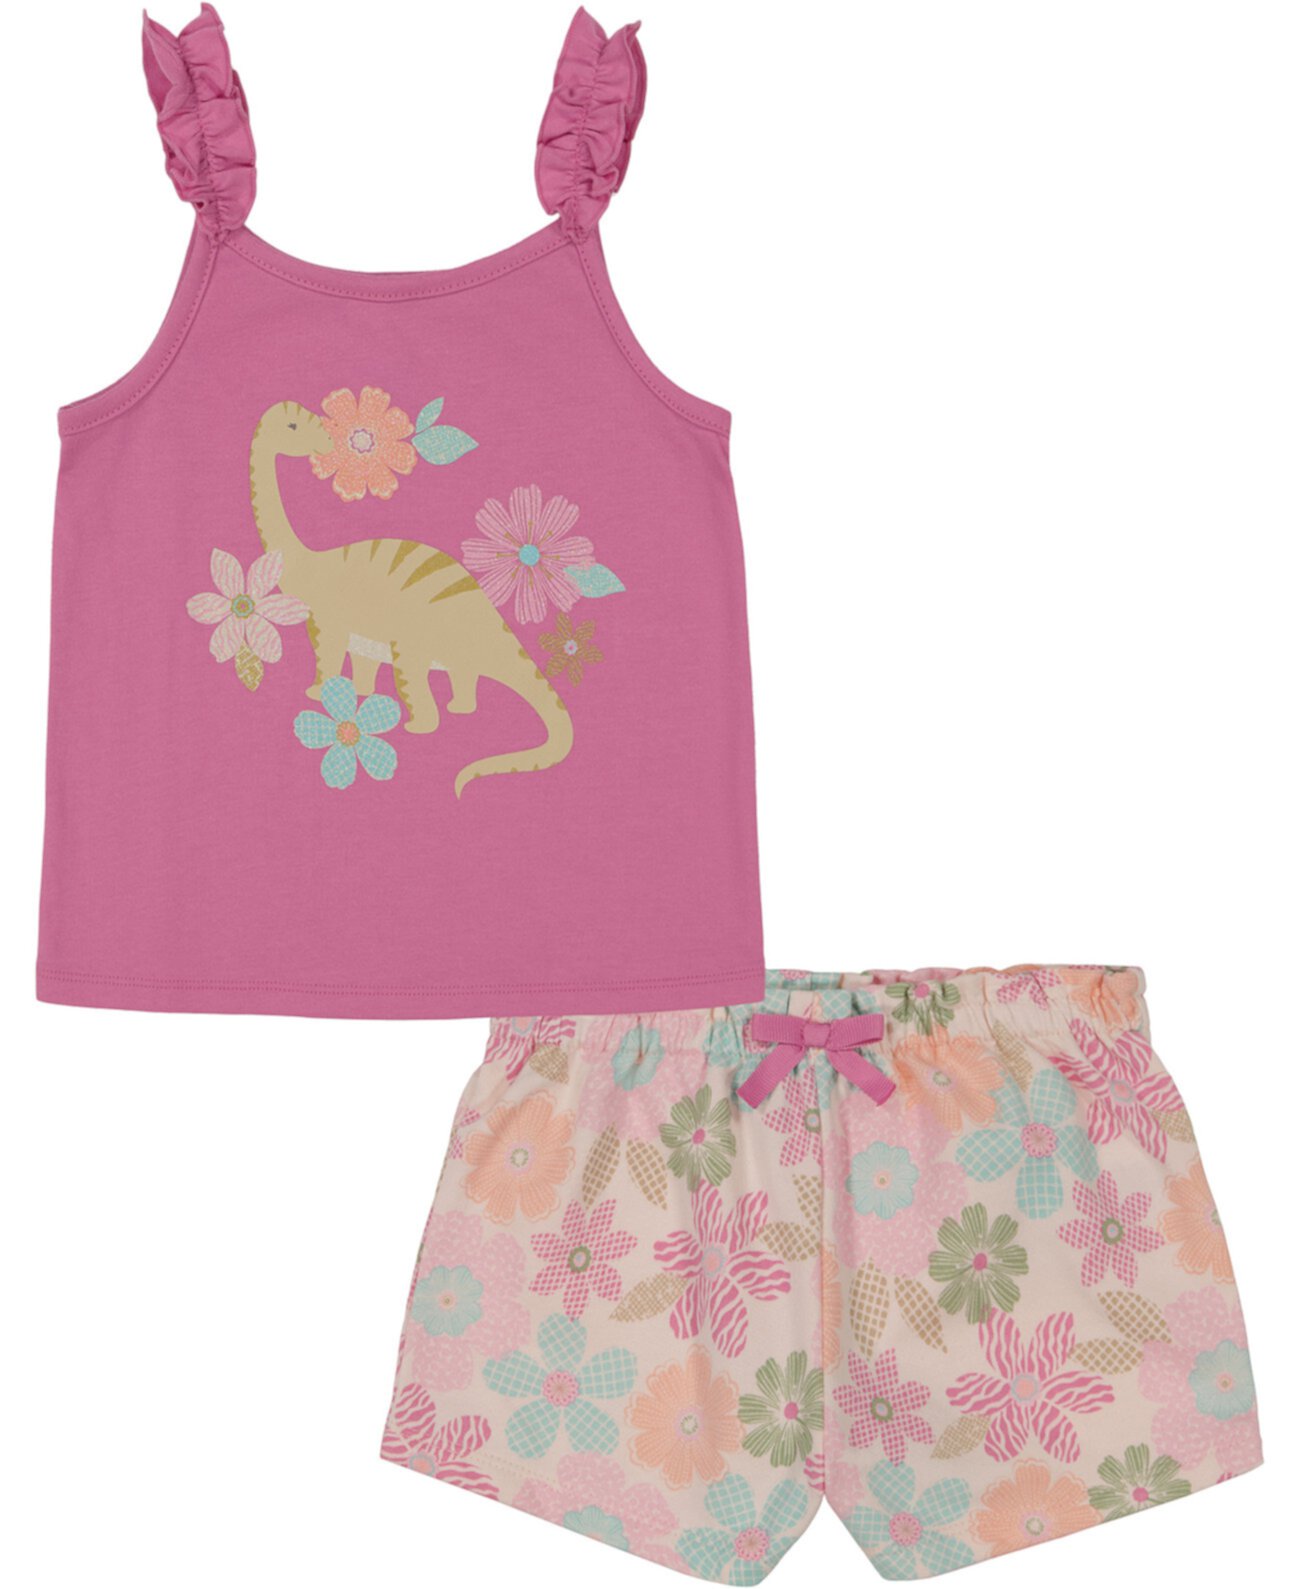 Toddler Girls Dinosaur Tank Top & Floral French Terry Shorts, 2 piece set Kids Headquarters